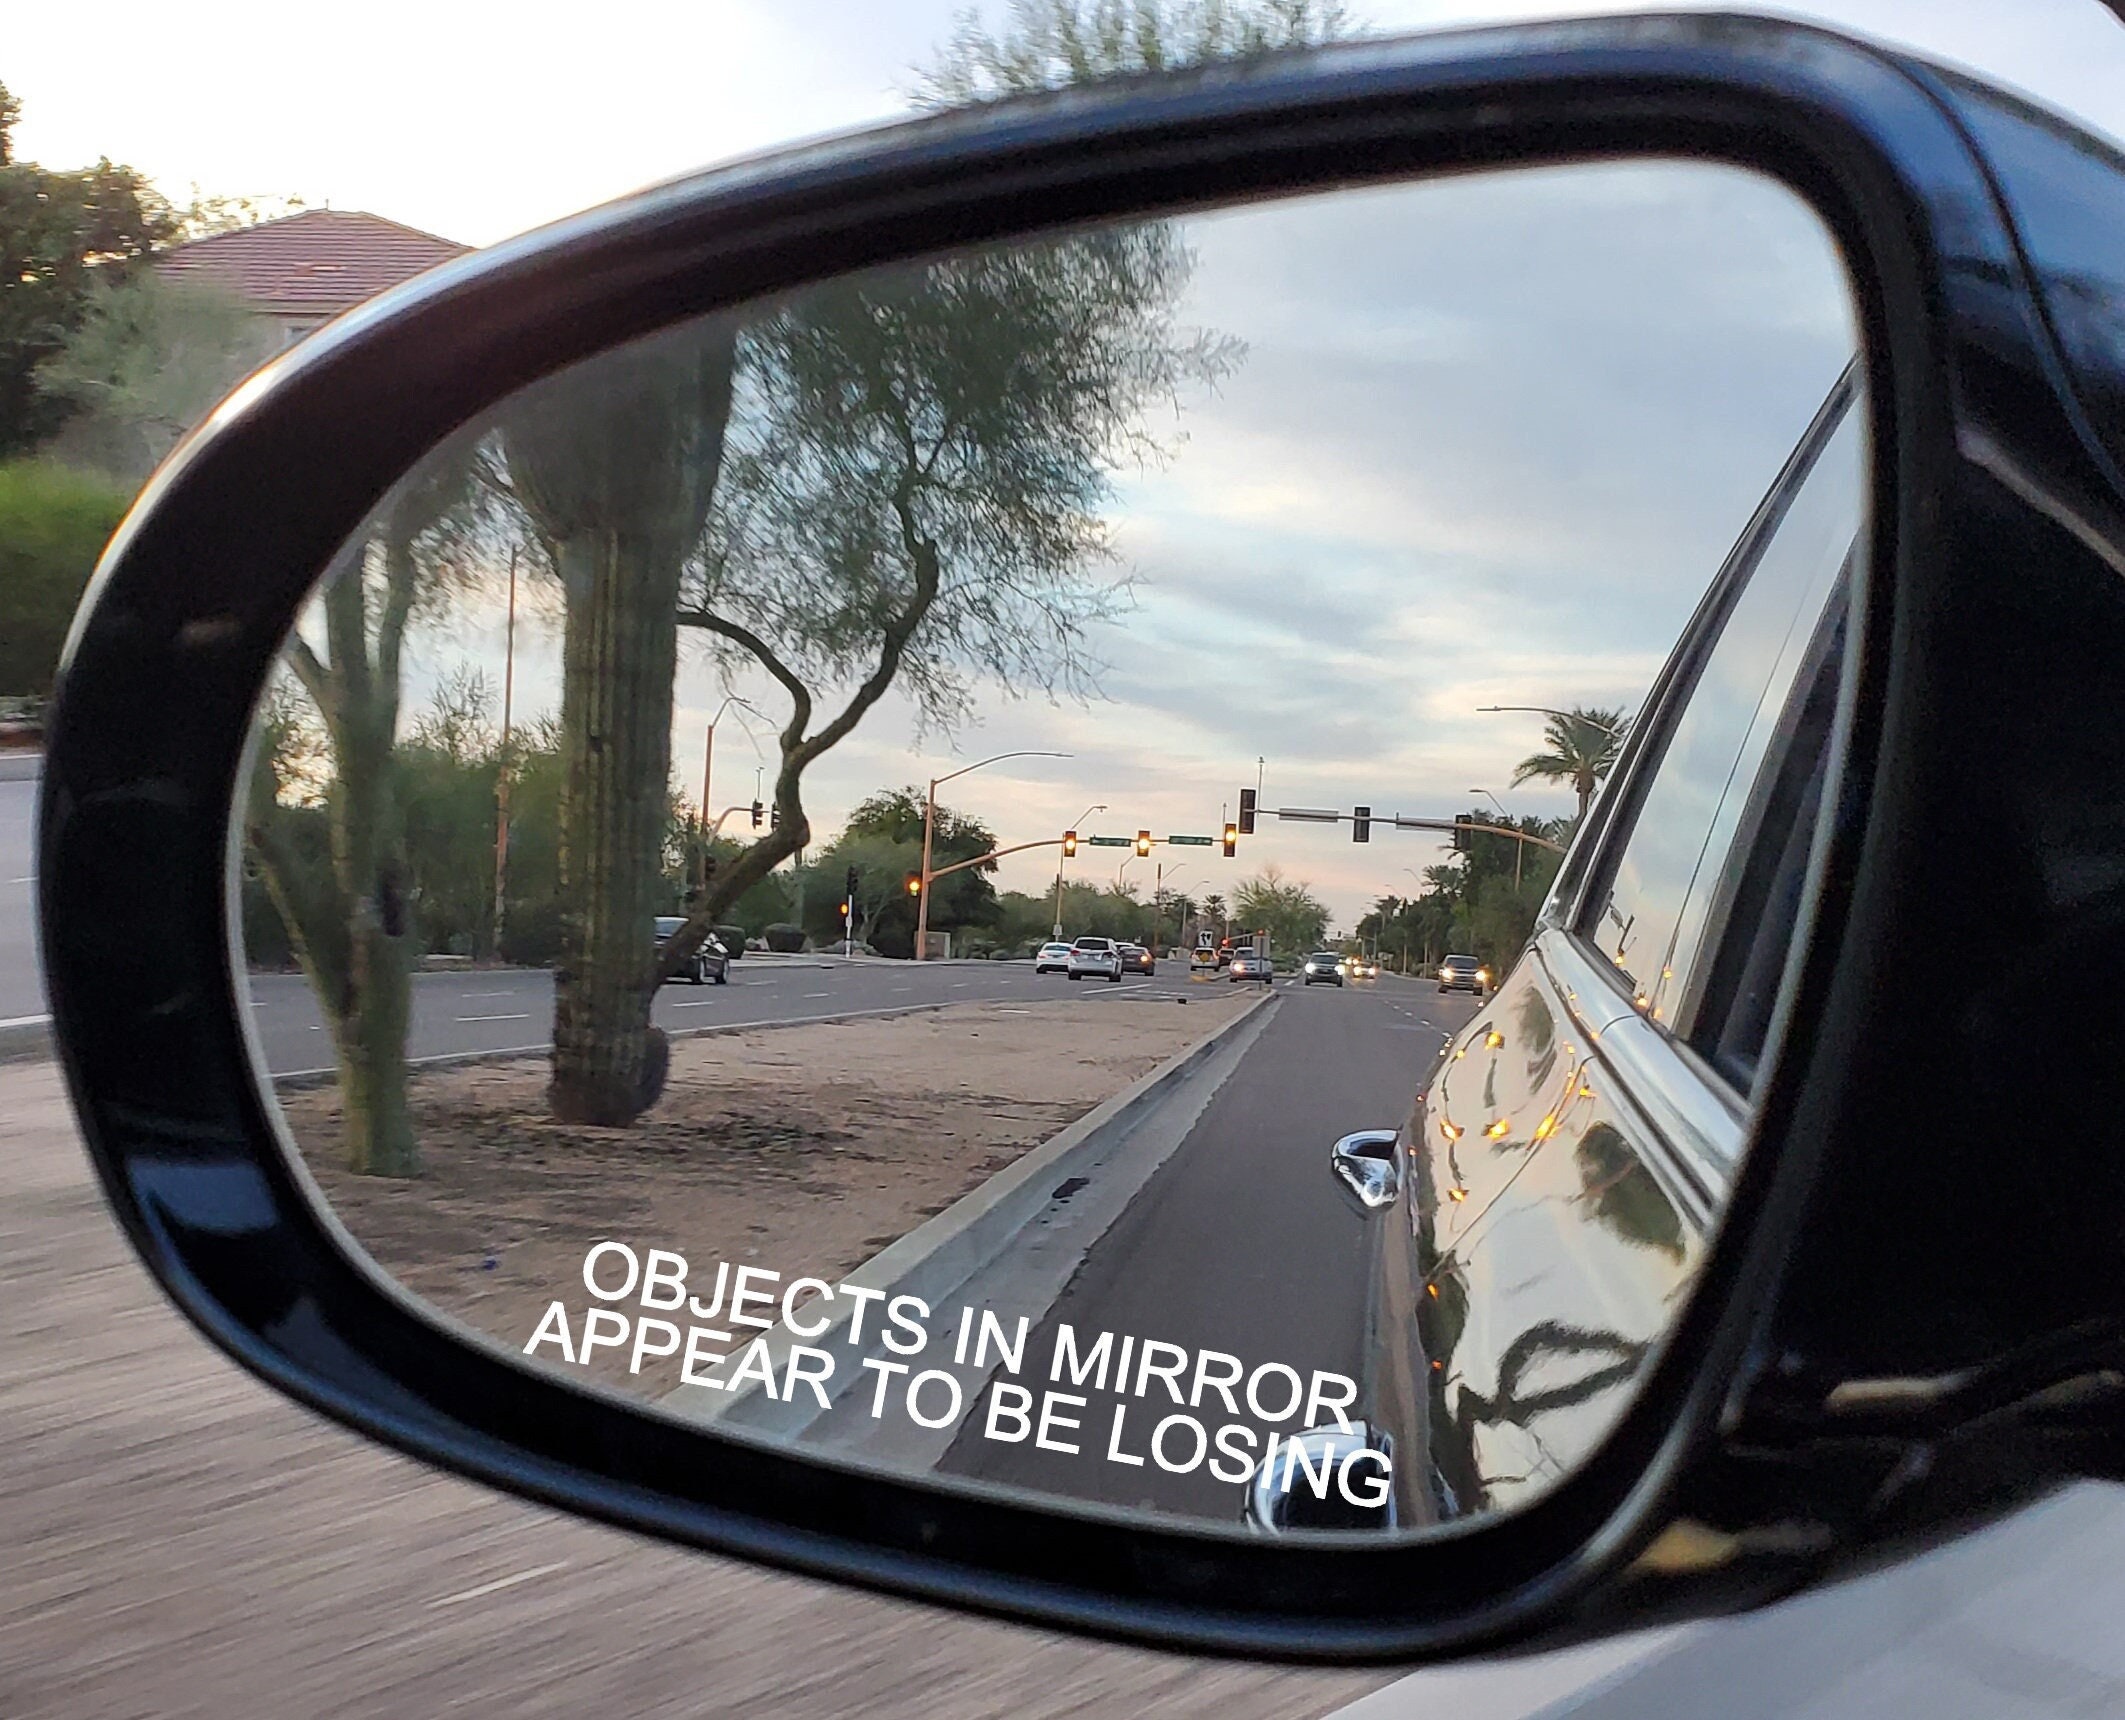 Objects in Mirror Are Losing 